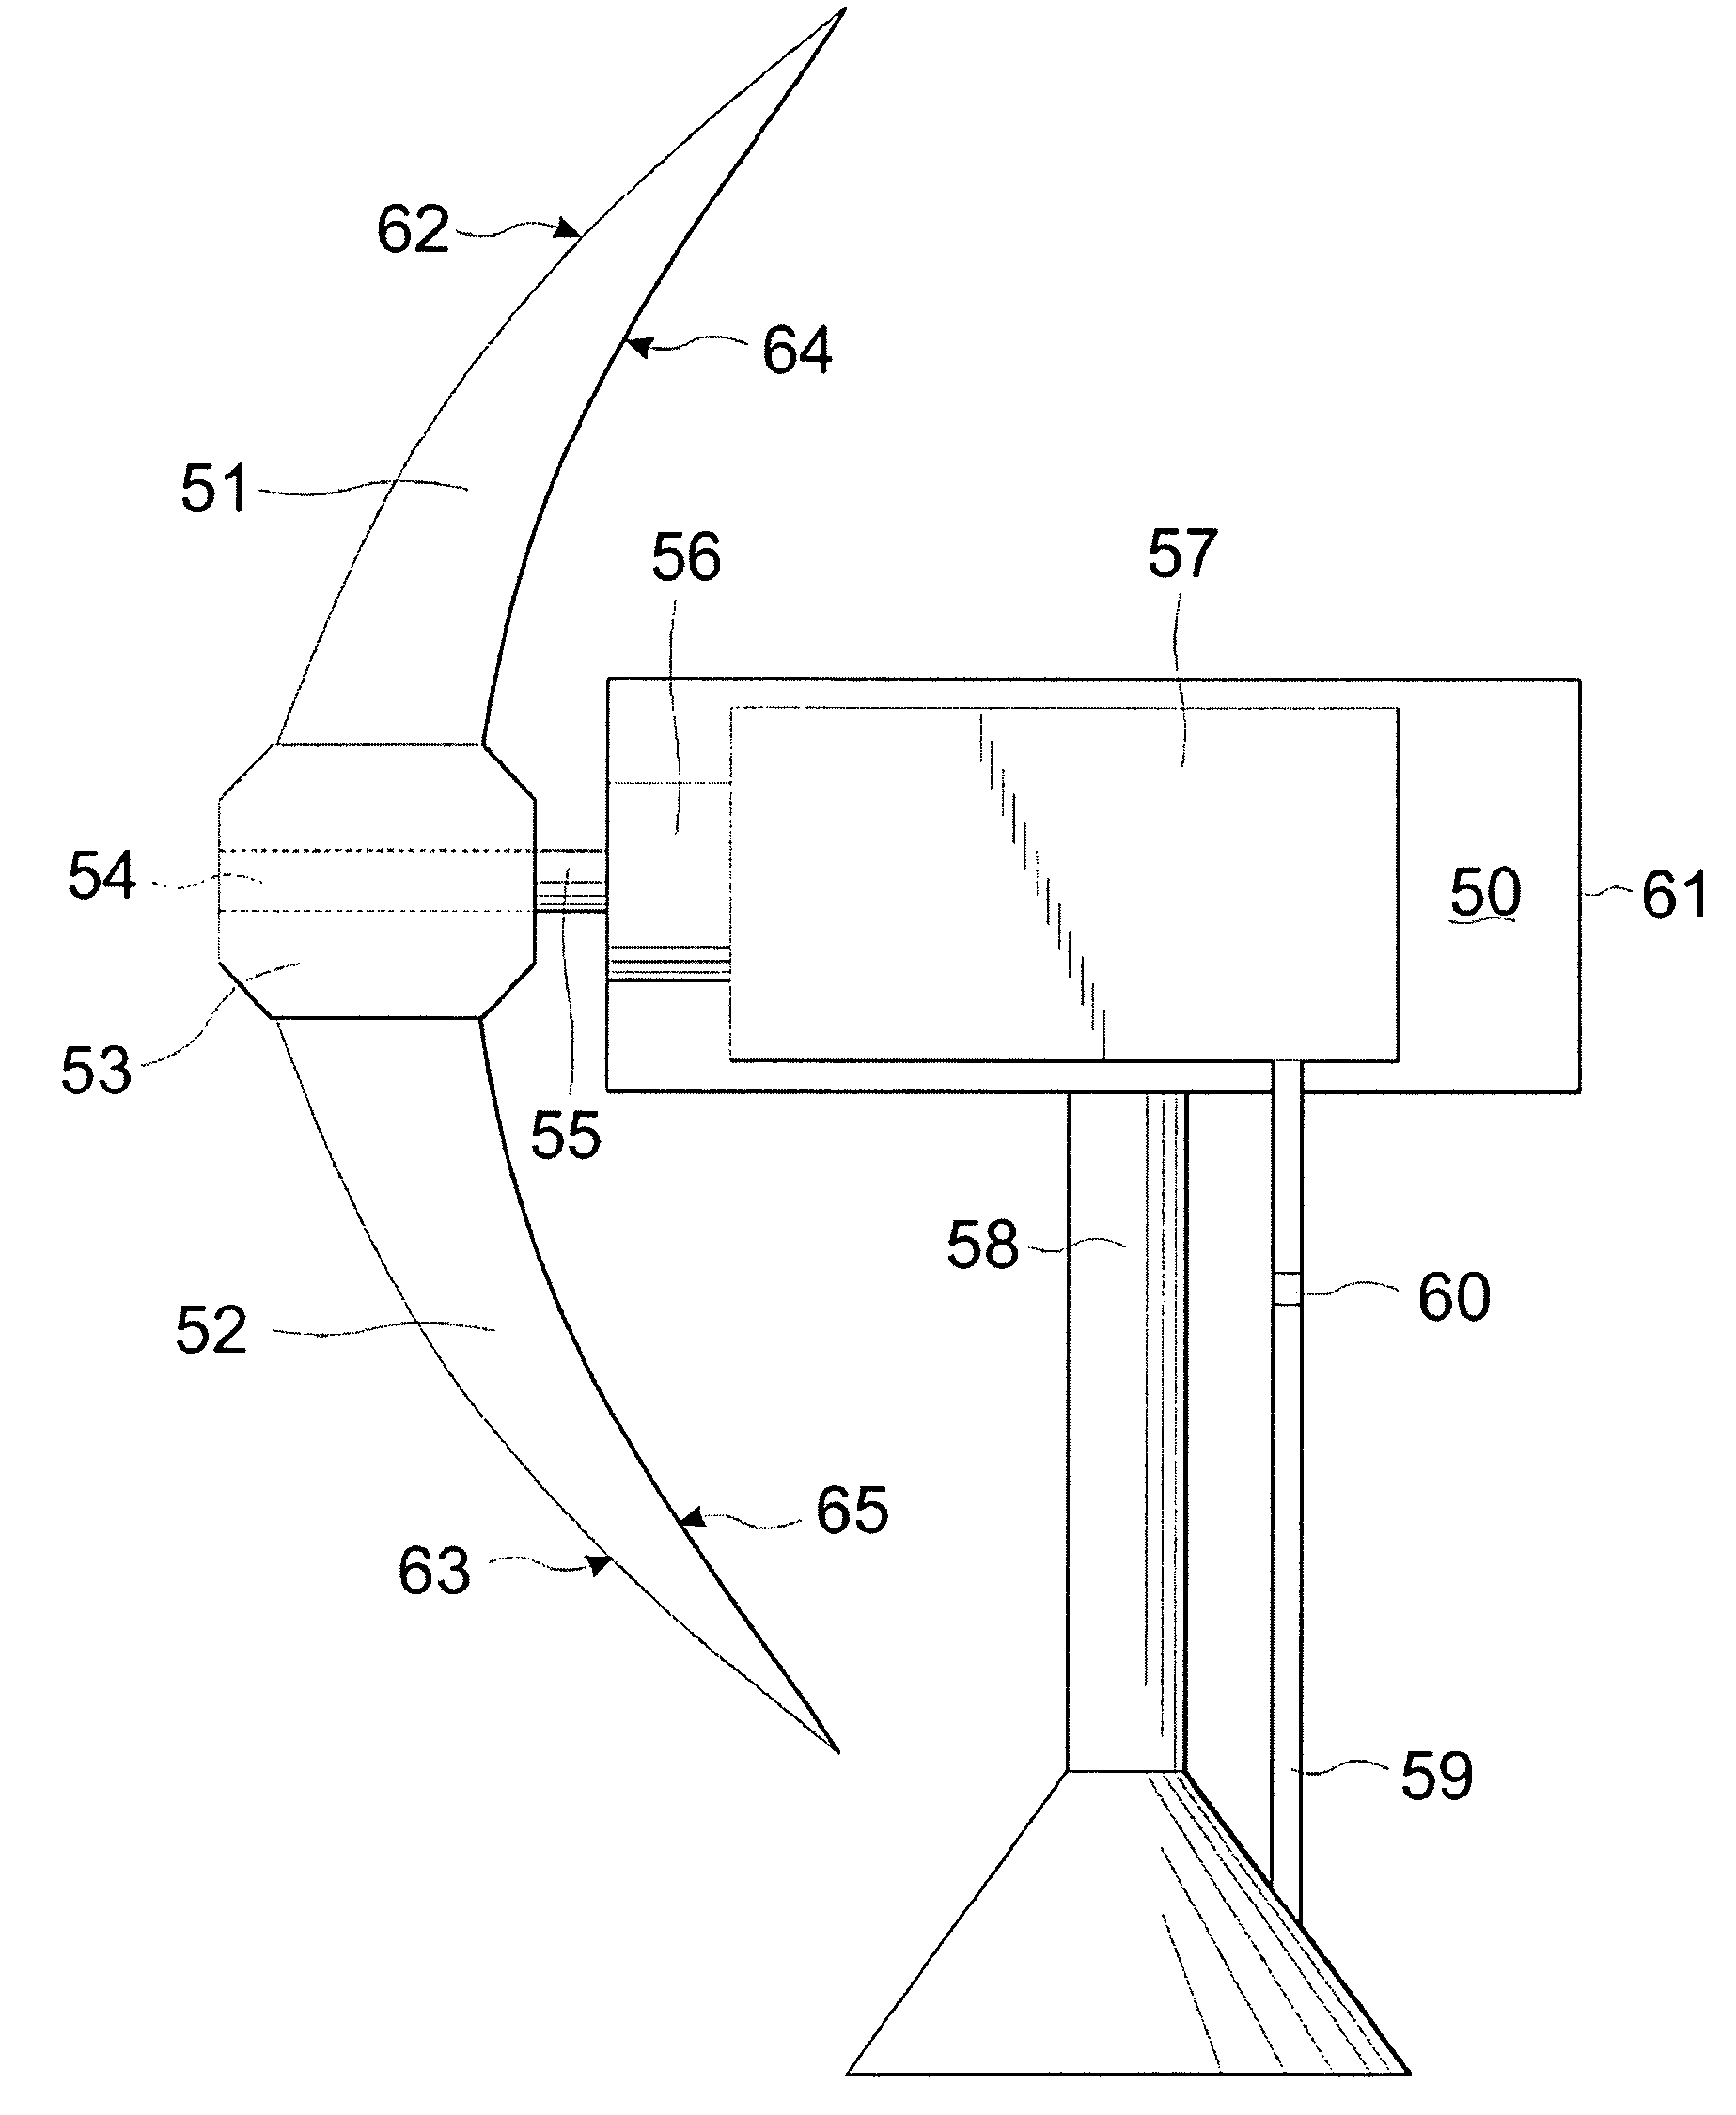 Rotor design for submersible electronic generator